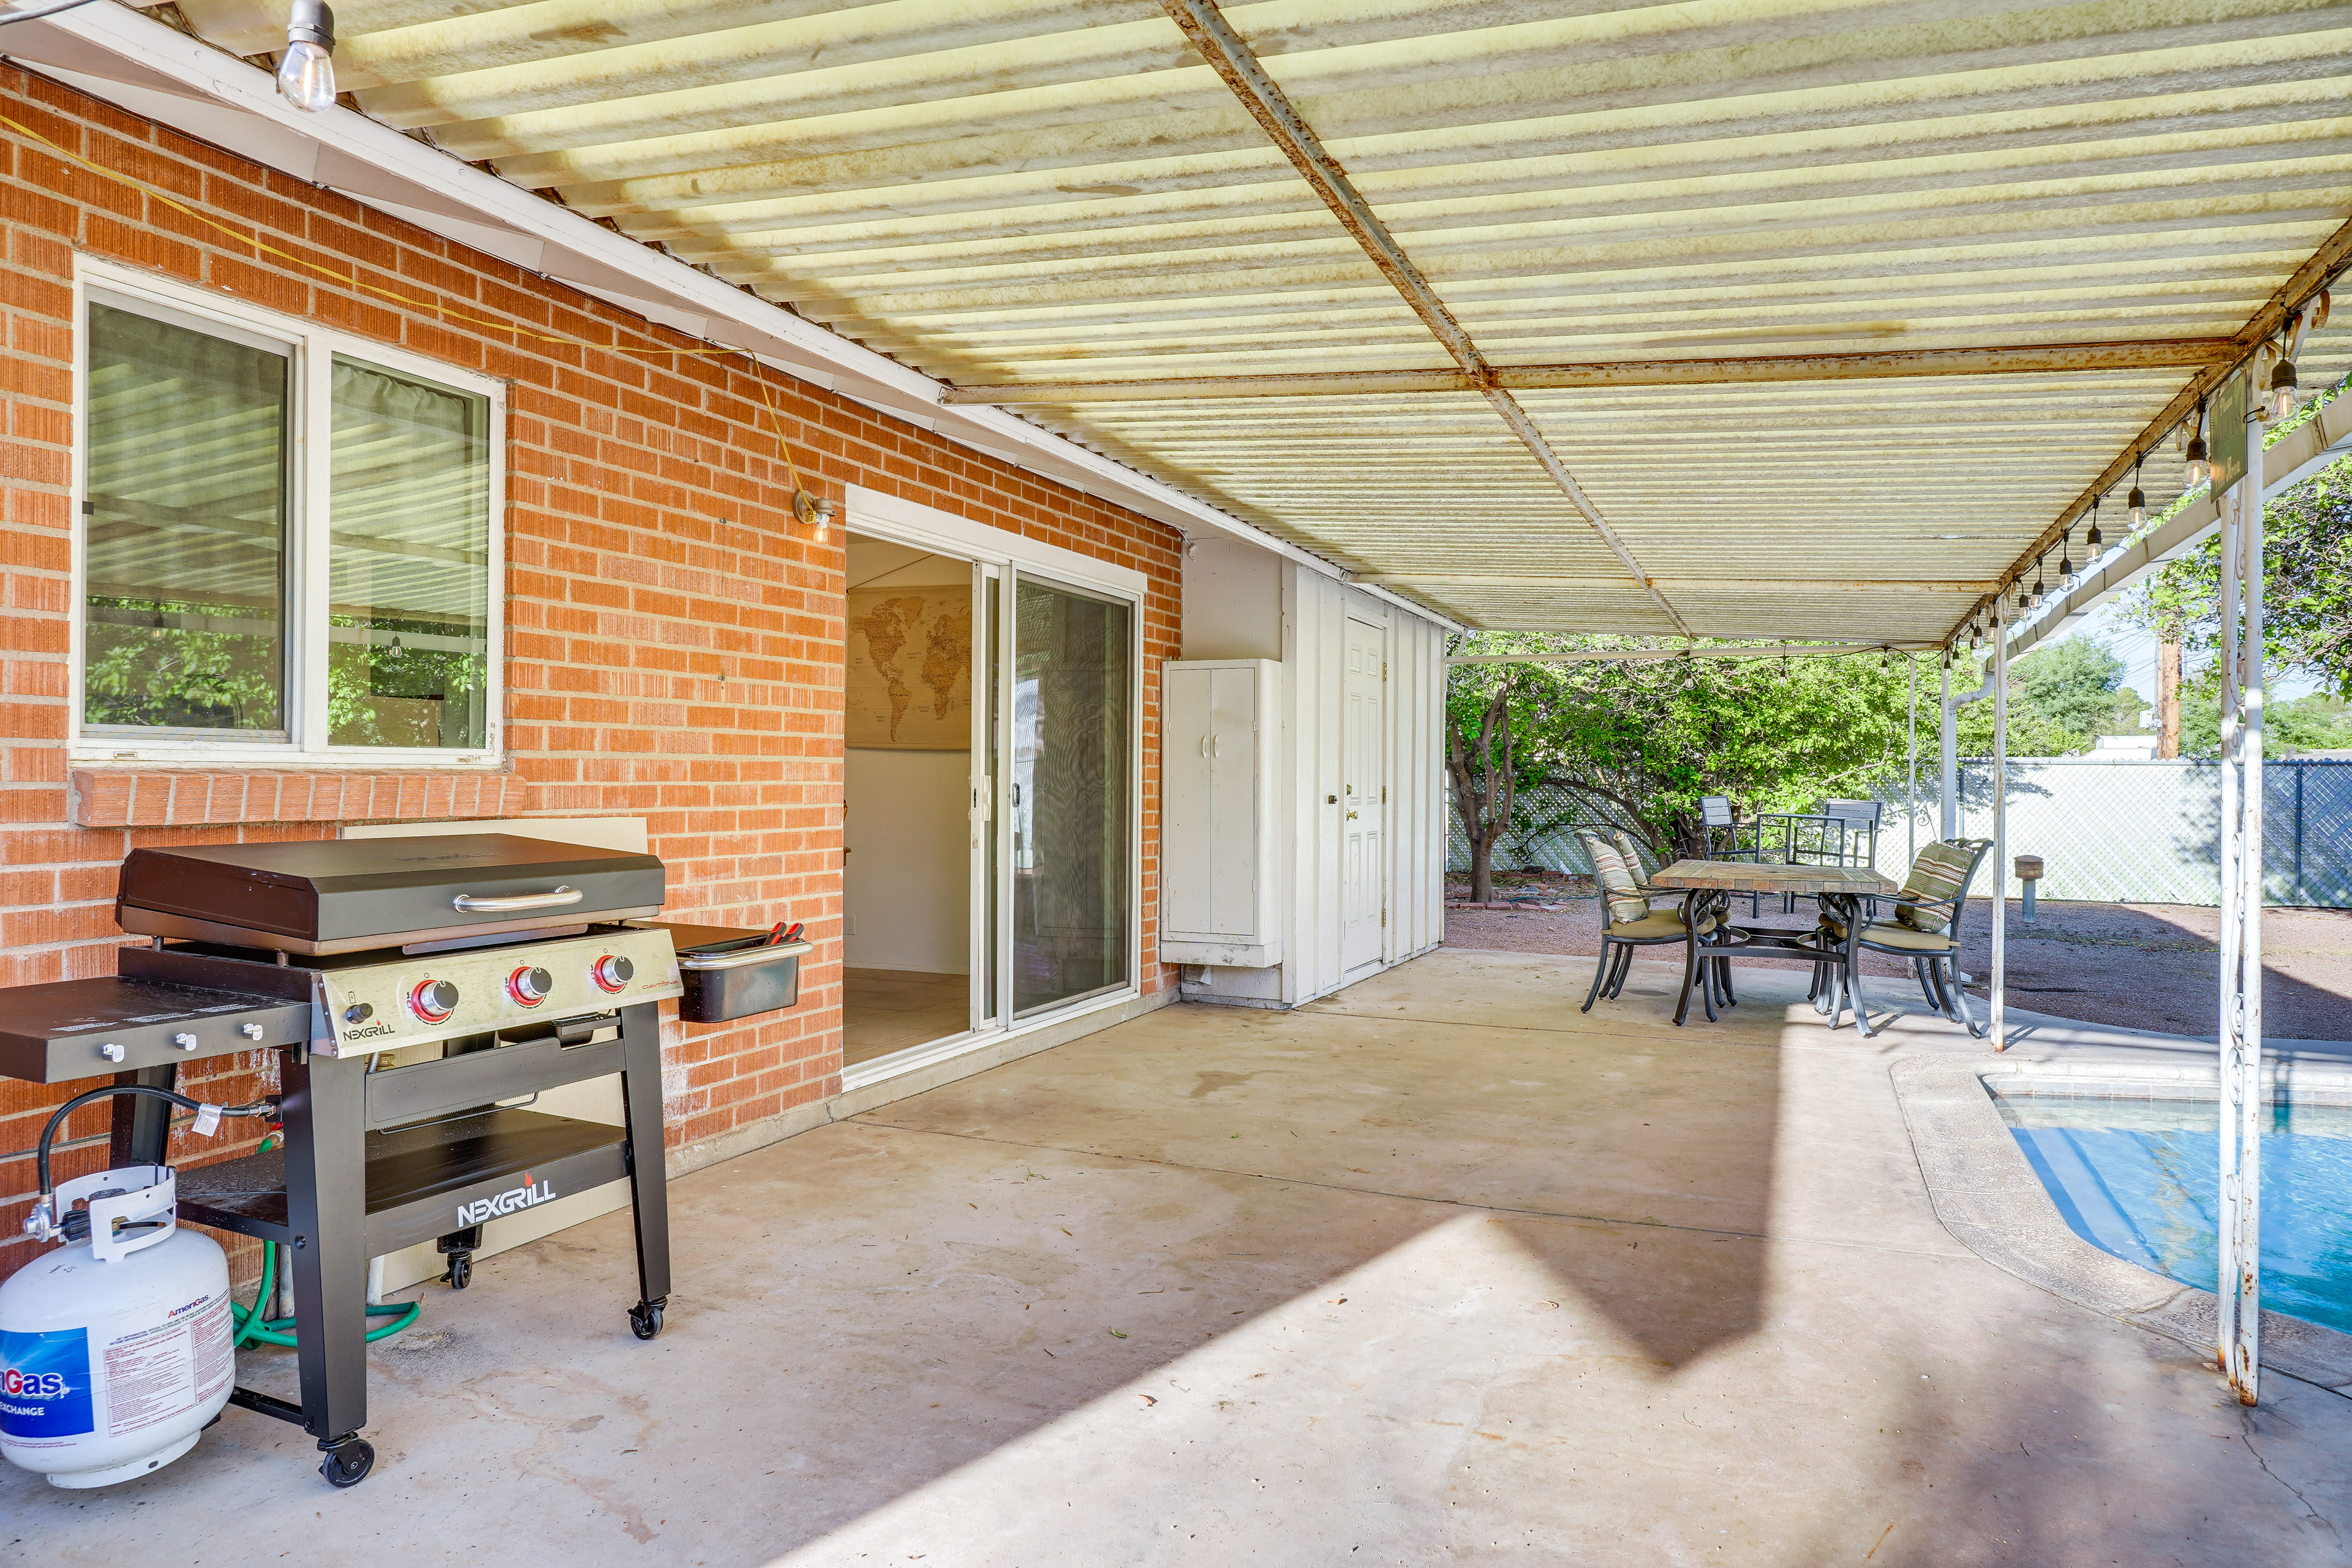 Private Backyard Area | BBQ Grill | Outdoor Pool